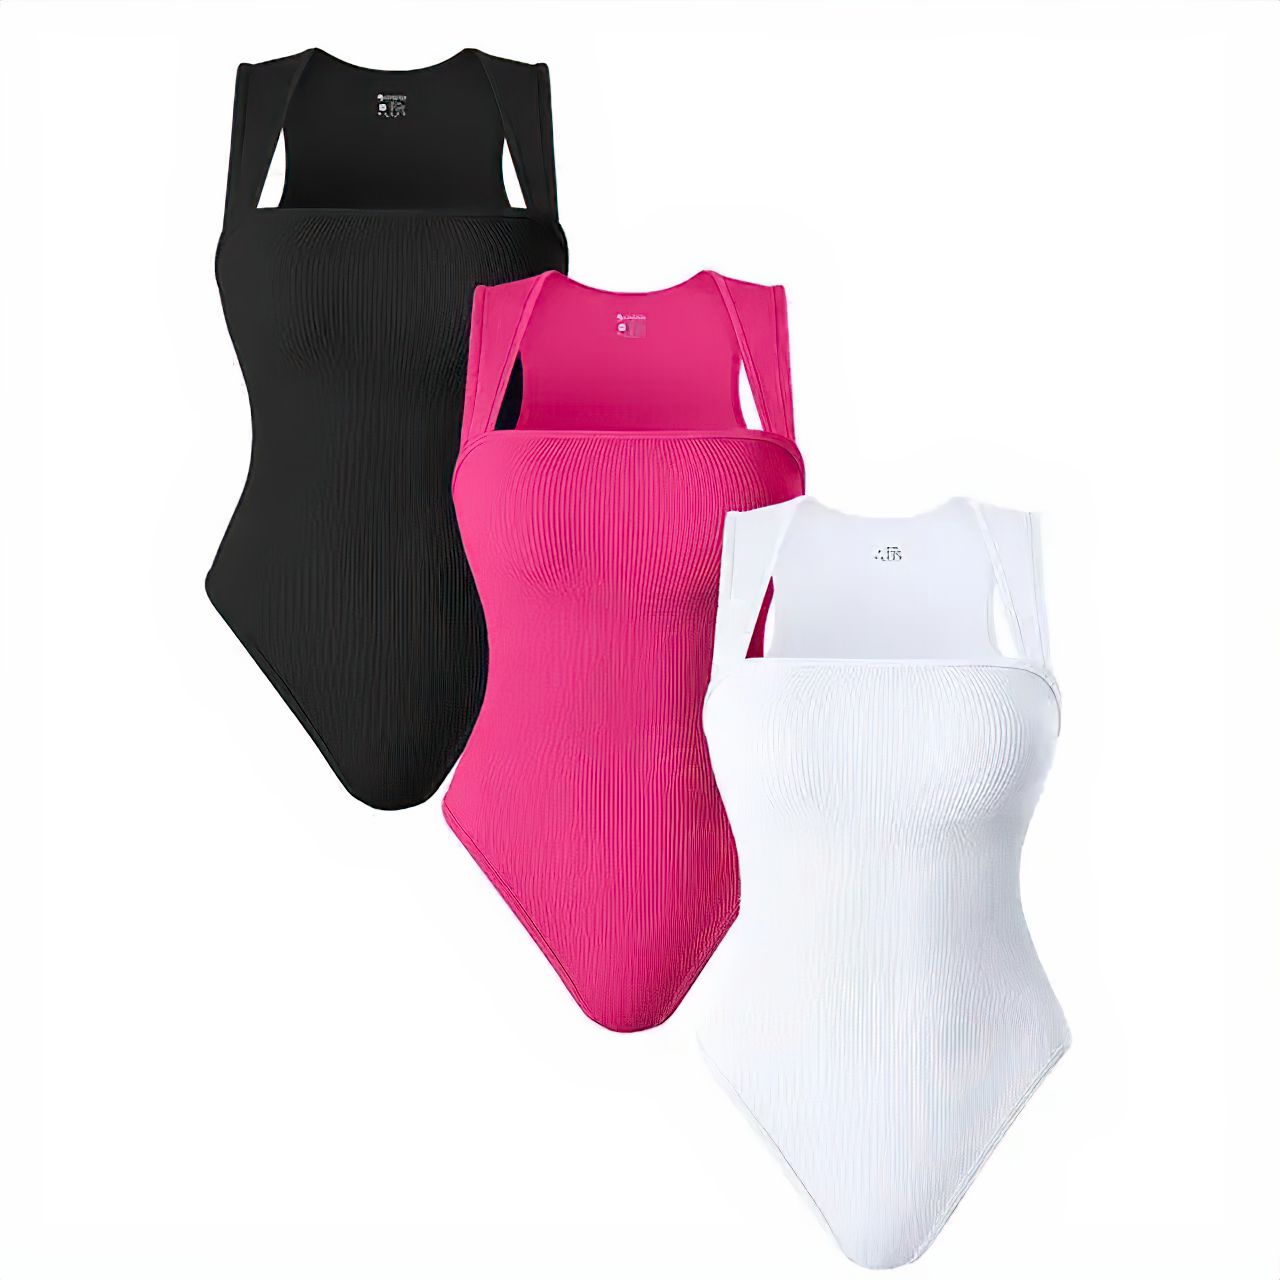 Shape Wear 3-Pack™ - Supporting comfort